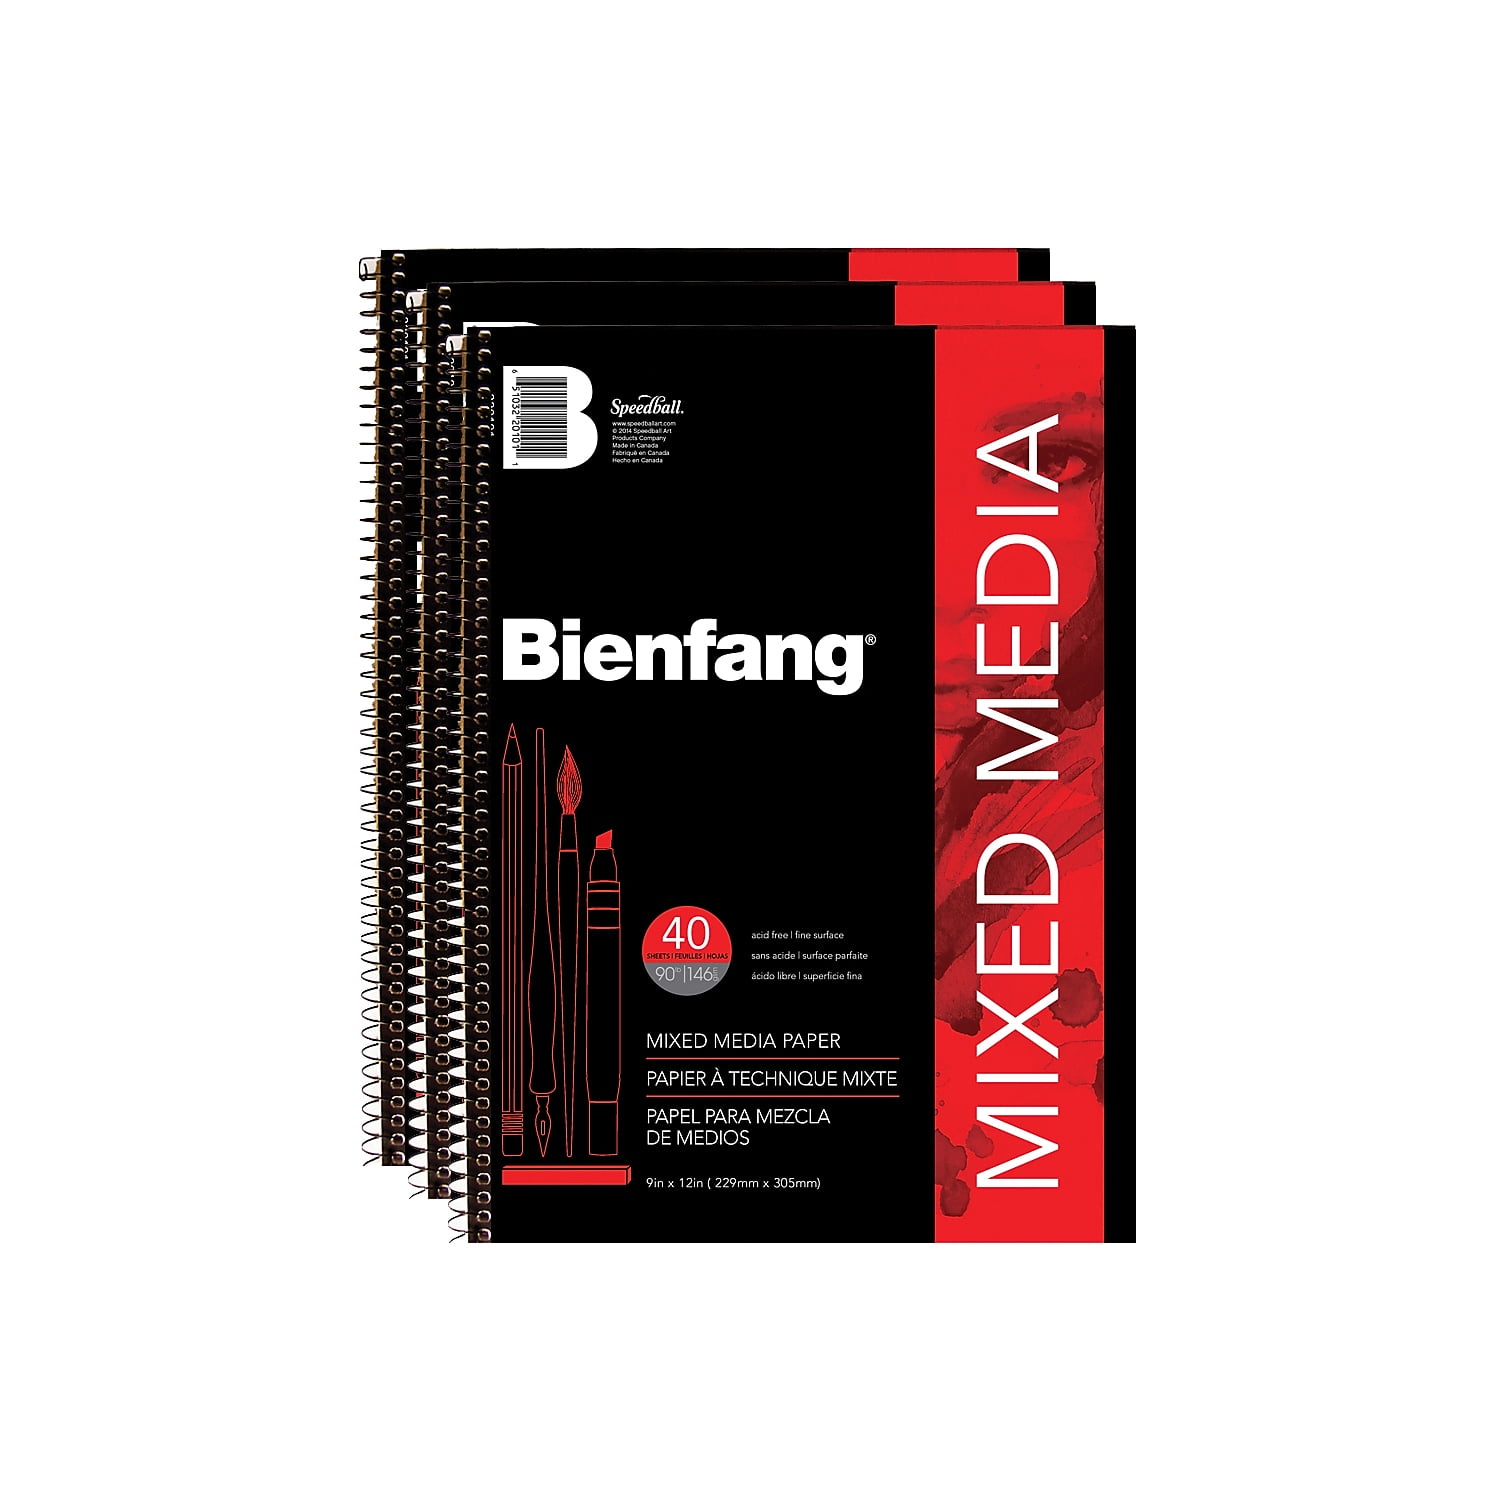 Bienfang Tracing Paper Pad, 9” x 12” - The Art Store/Commercial Art Supply